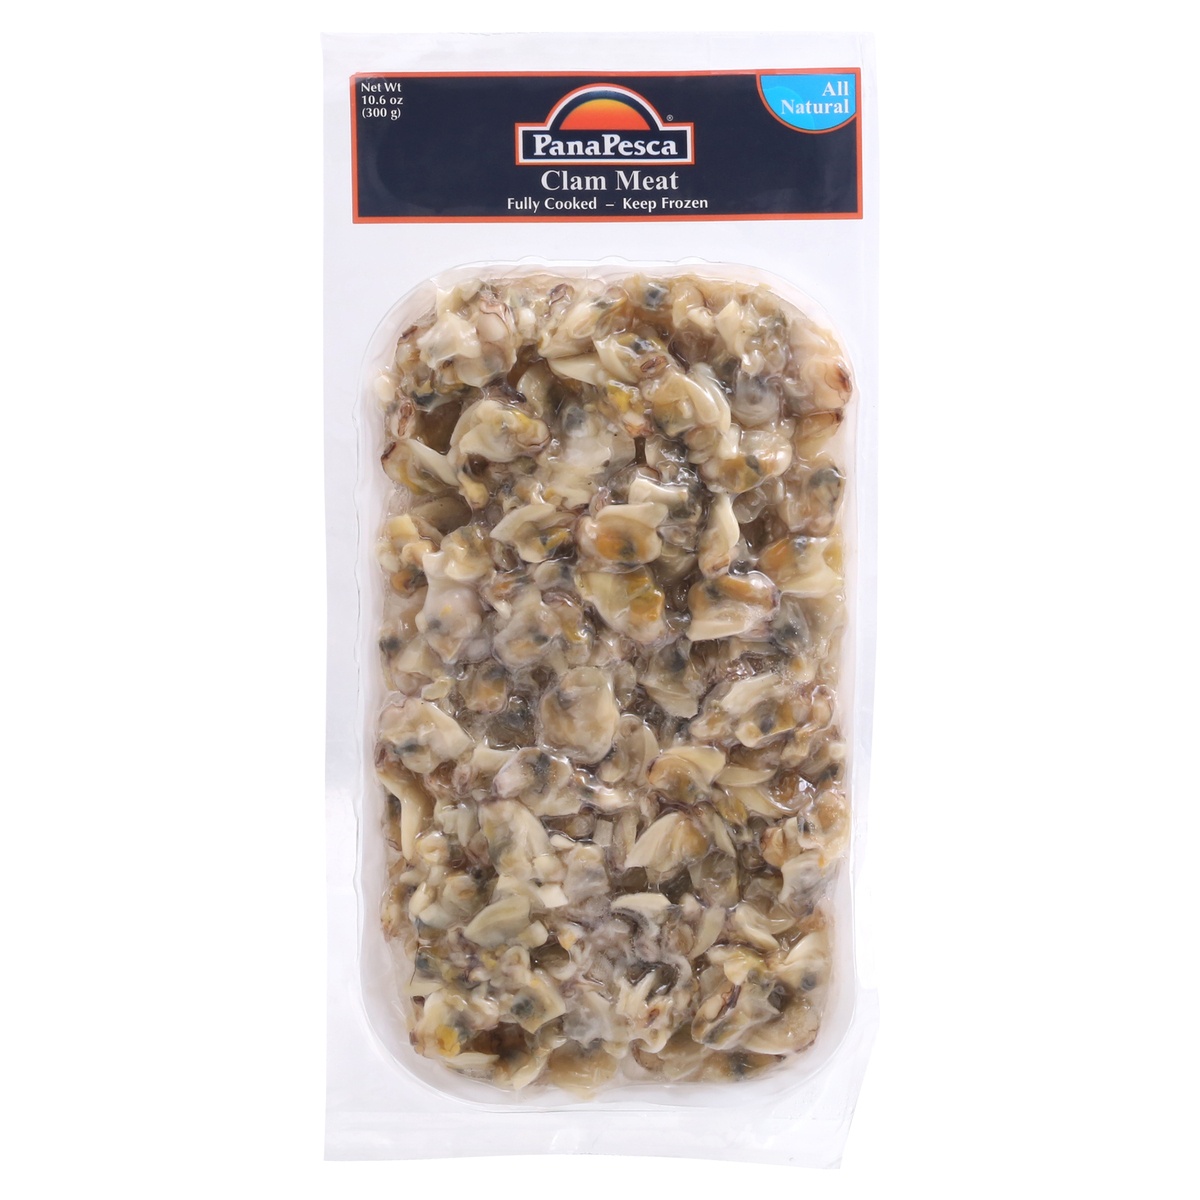 slide 1 of 9, PanaPesca Pana Pesca Clam Meat Skin Pack, 10.6 oz